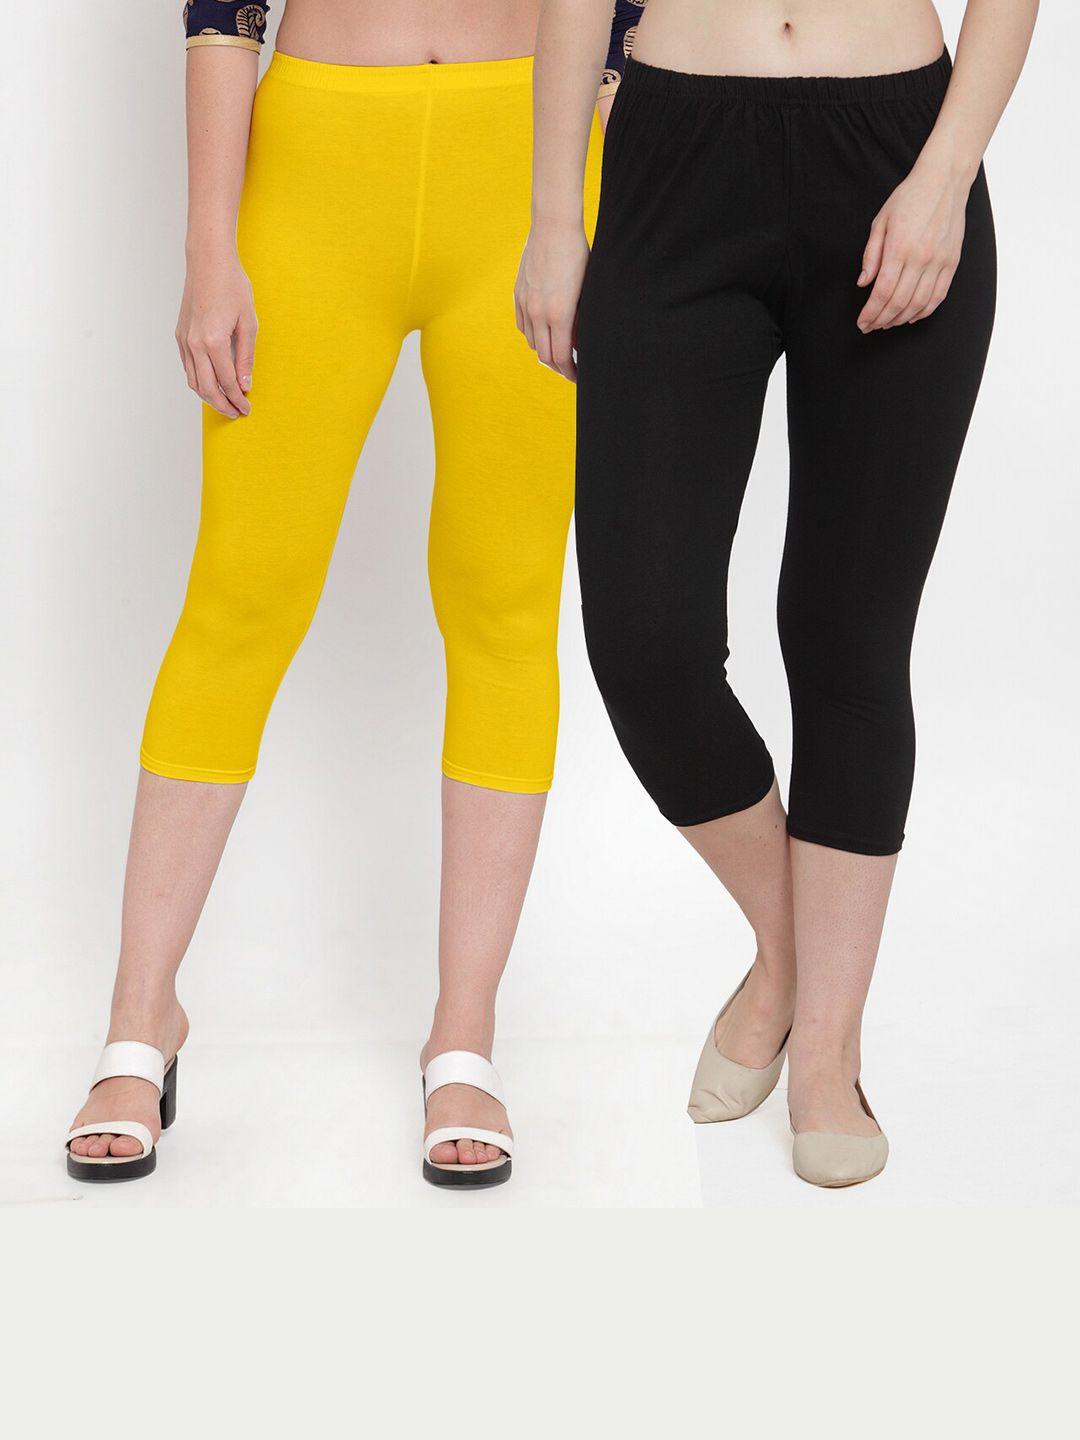 jinfo women black & yellow solid capris pack of 2